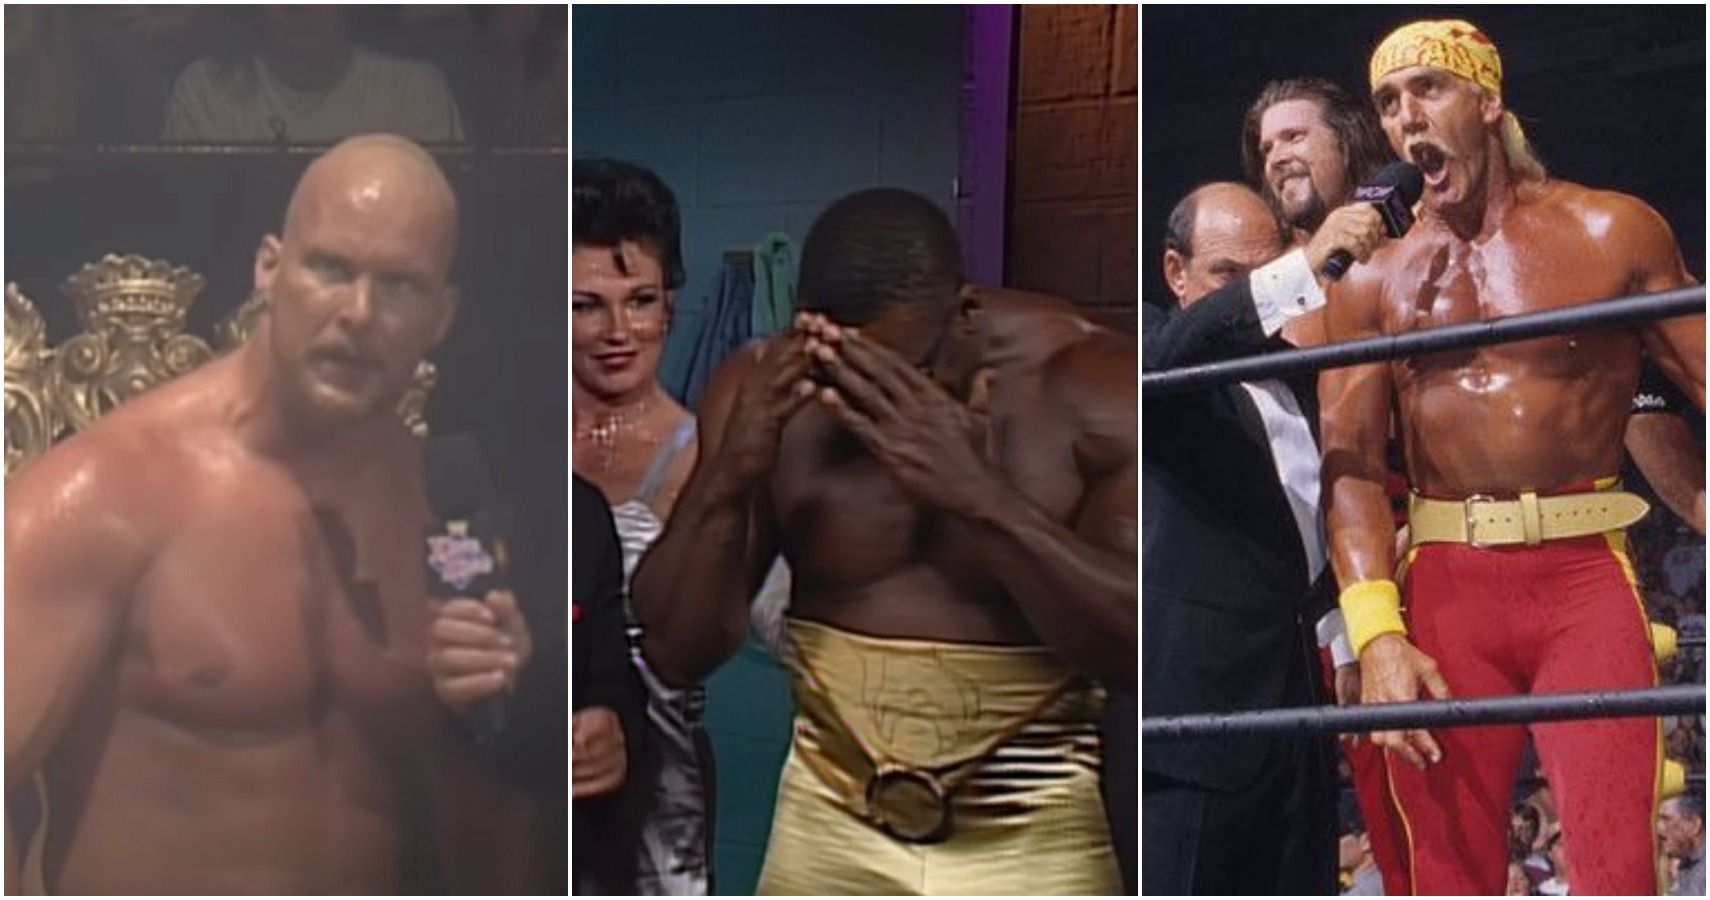 A collage of Steve Austin at King of the Ring 1996, Booker T at Spring Stampede 1997, and Hulk Hogan at Bash at The Beach 1996